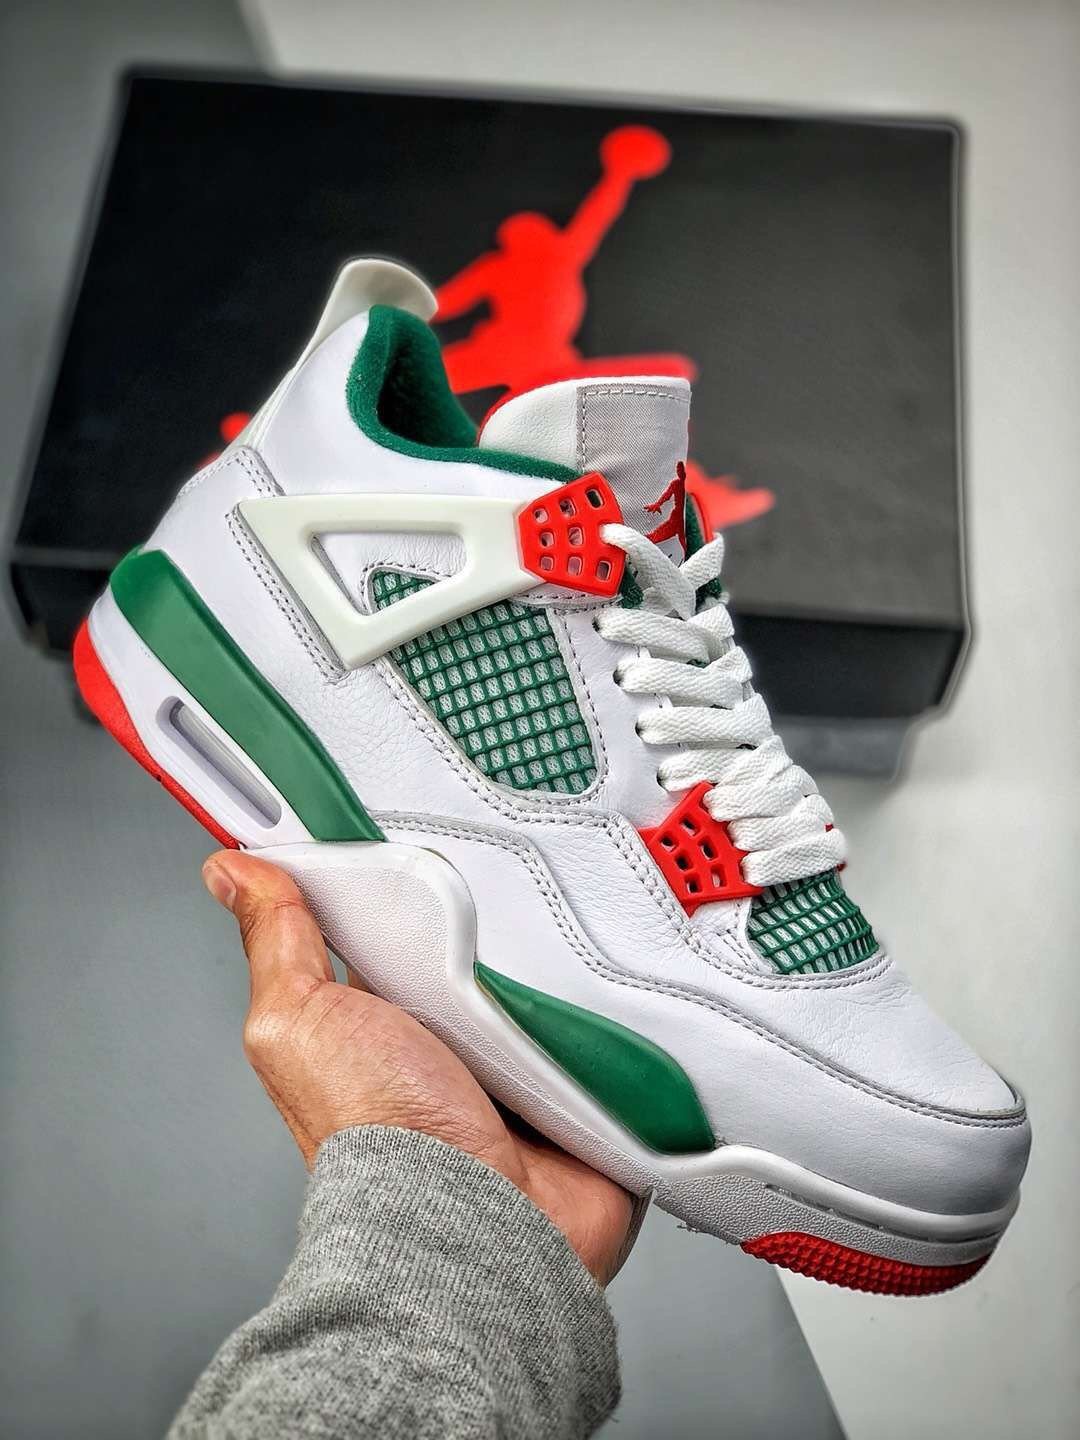 Air Jordan 4 Retro Do The Right Thing White Gorge Green-Varsity Red For Sale